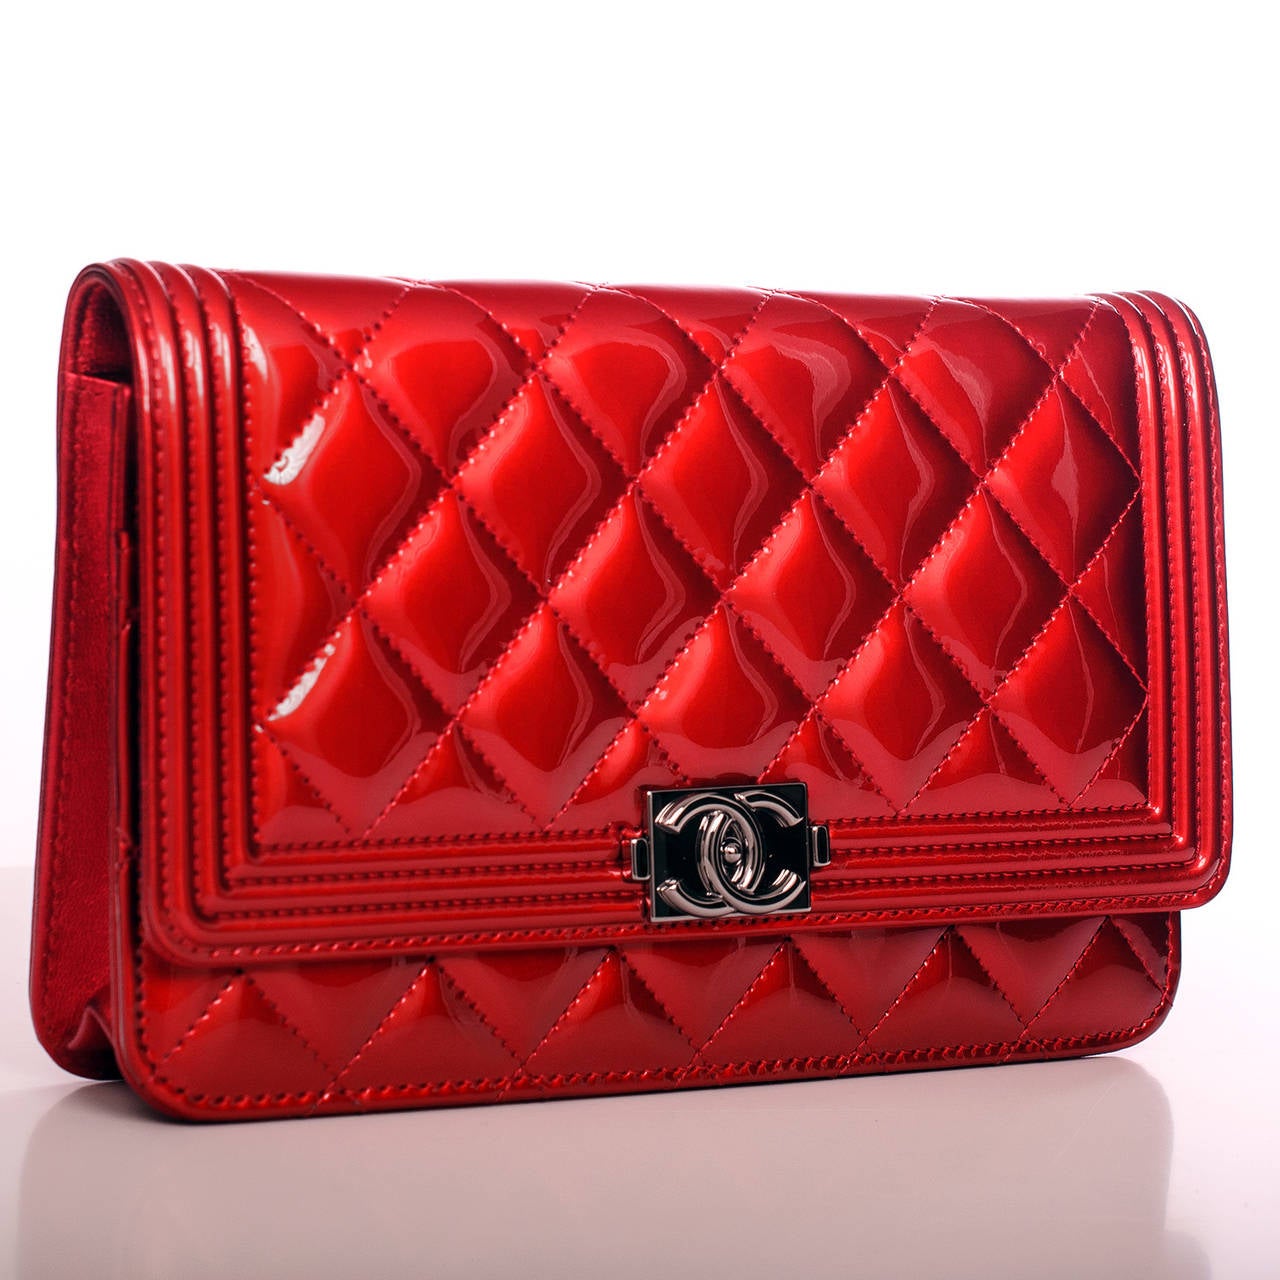 Chanel limited edition red Metallic Patent Boy Wallet On Chain (WOC) in quilted patent leather with ruthenium hardware.

The Wallet On Chain (WOC) is one of the most desired Chanel accessories. Its great styling, versatility and attractive price